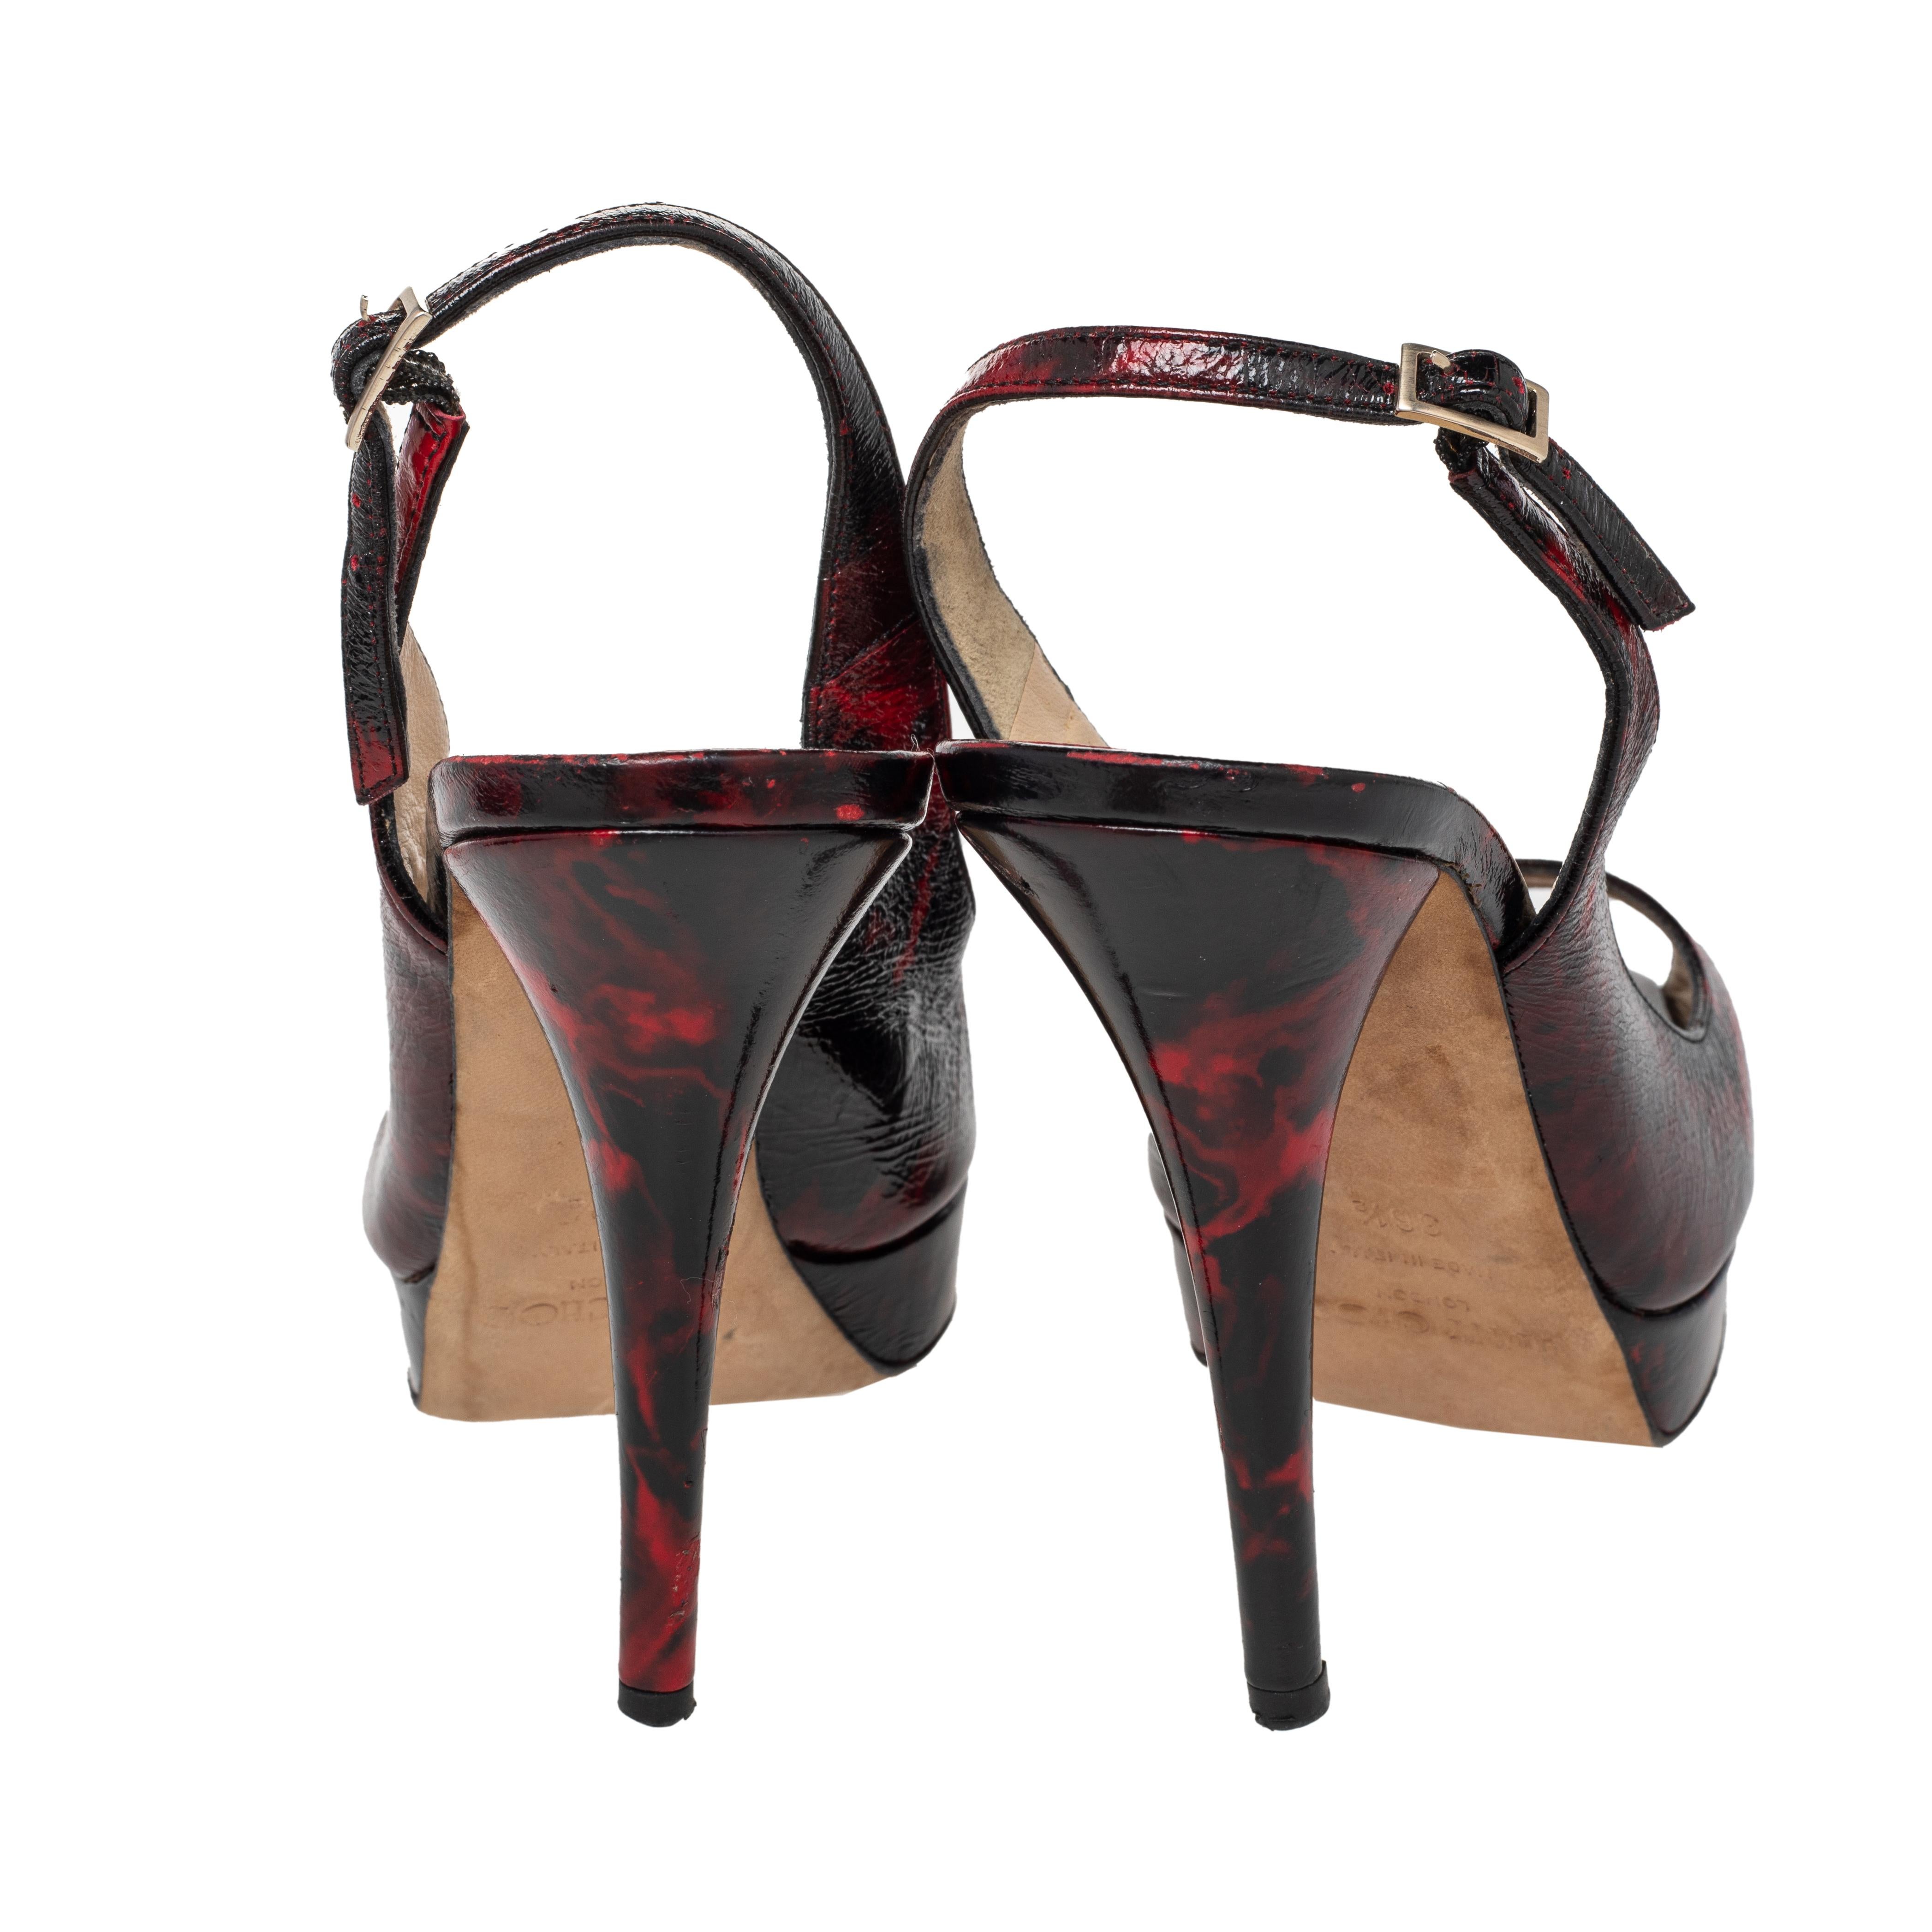 Jimmy Choo Red/Black Patent Leather Clue Peep Toe Slingback Sandals Size 36.5 In Good Condition For Sale In Dubai, Al Qouz 2